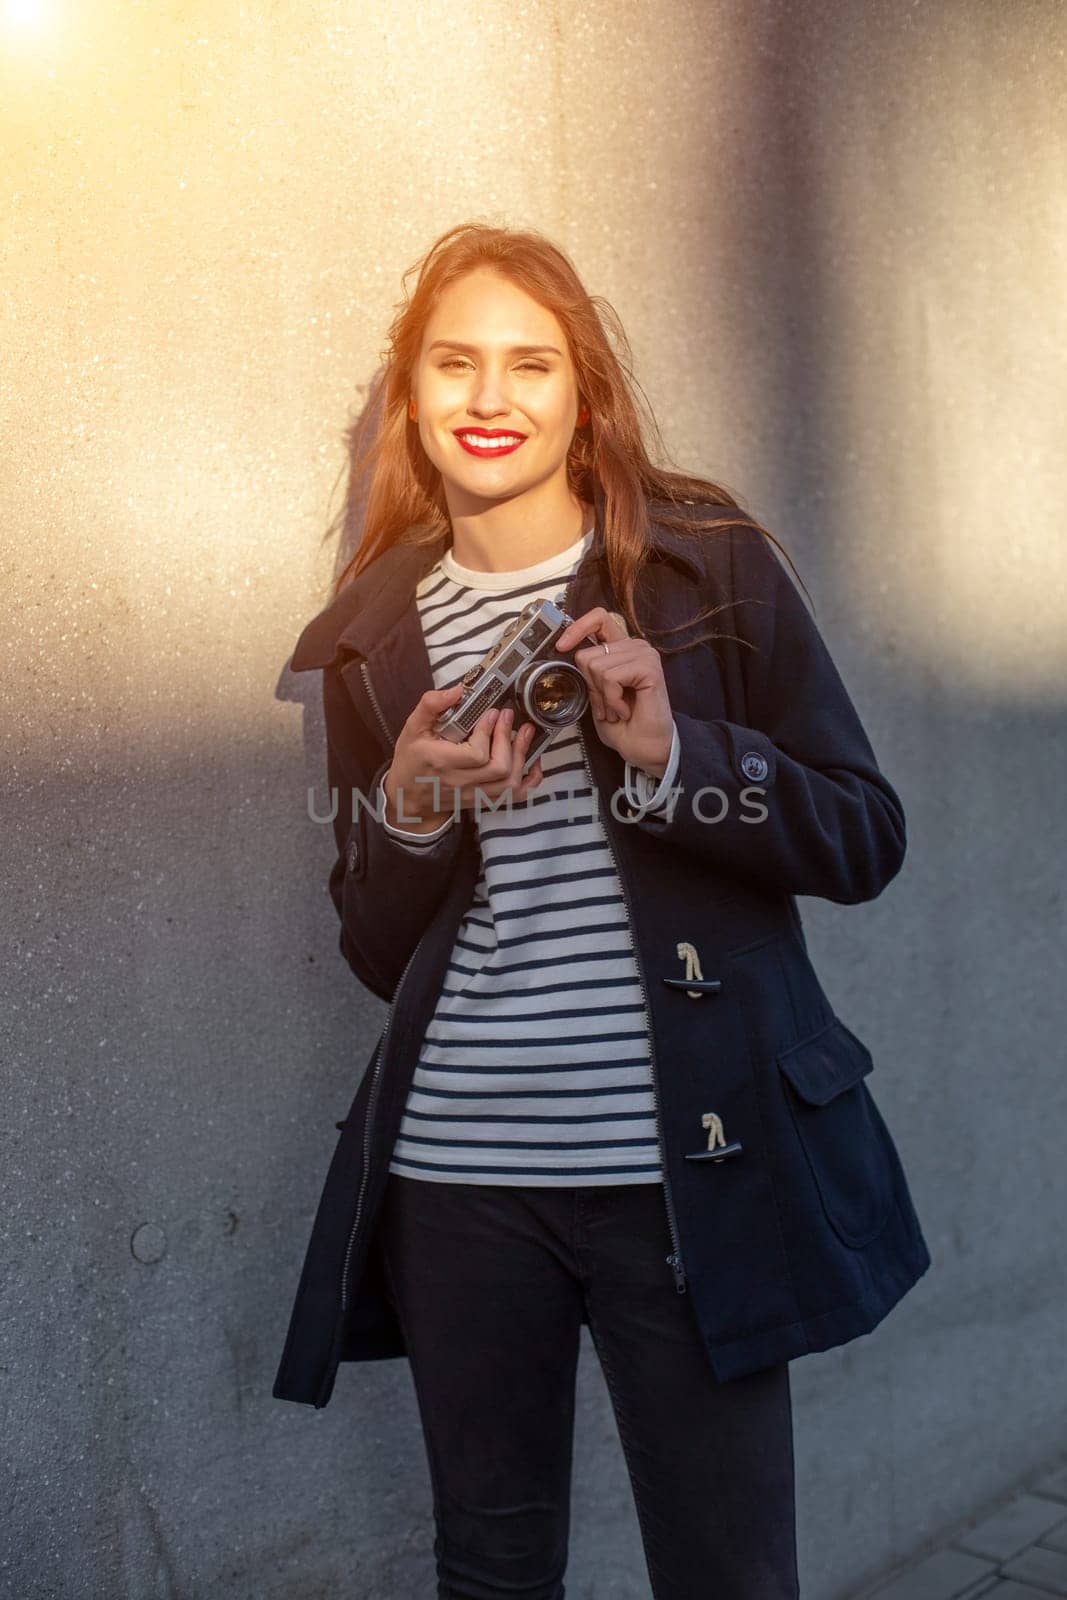 Smiling female photographer in jacket standing in front of wall ready to make new photo. Adorable young brunette woman in trendy outfit posing on concrete wall background with camera